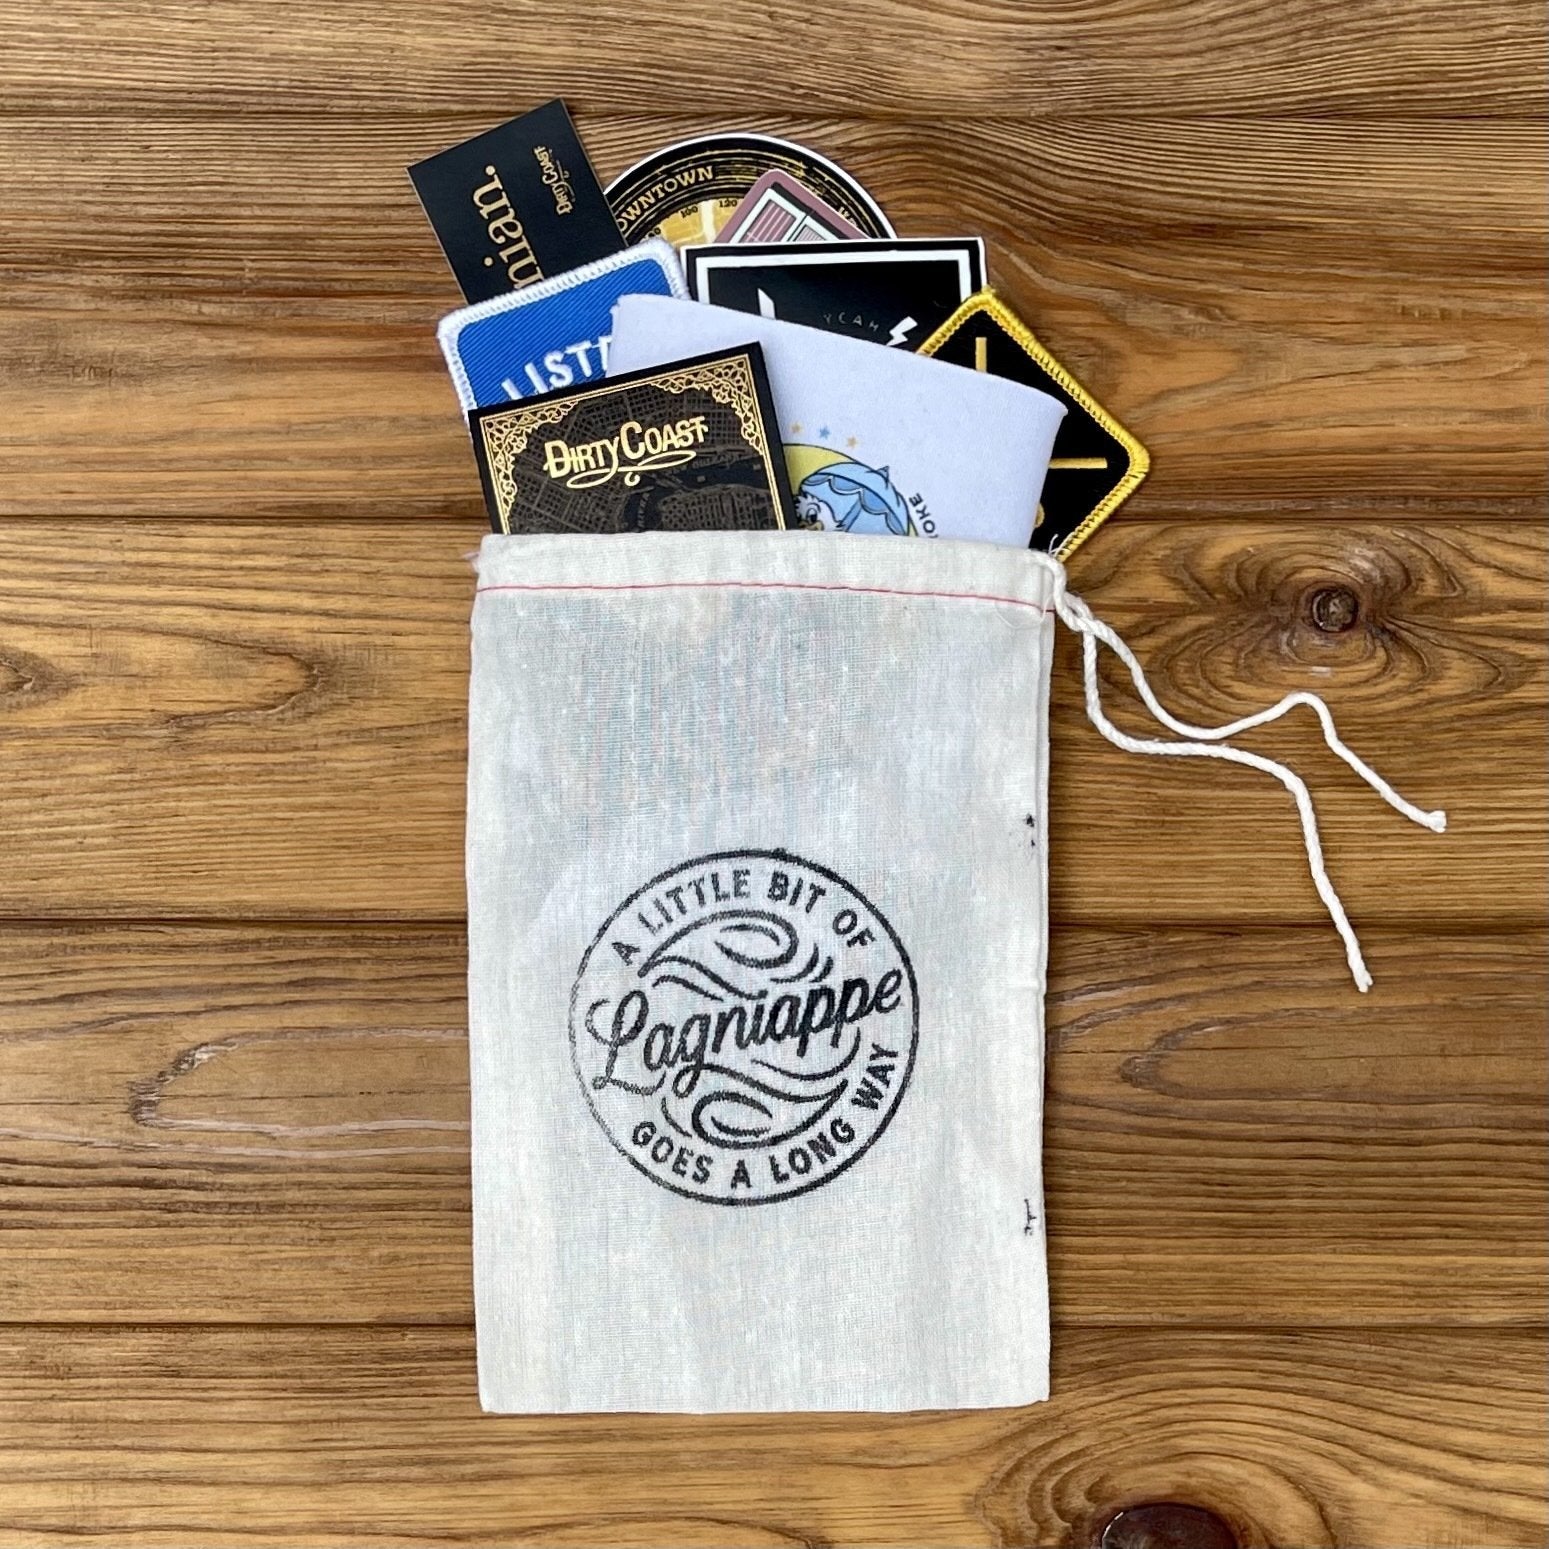 Lagniappe Pack: A Little Something Extra - Dirty Coast Press